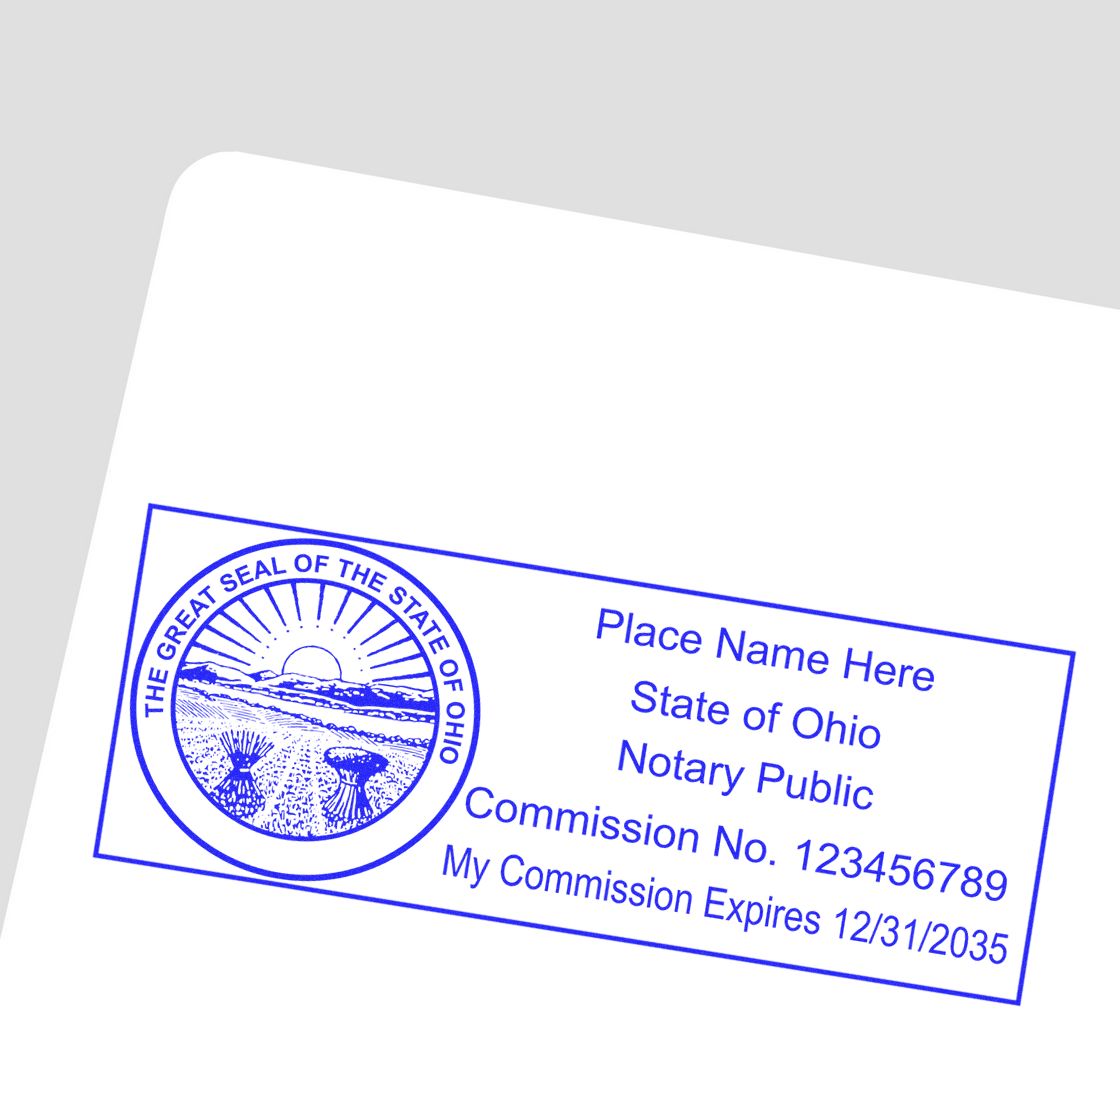 An alternative view of the PSI Ohio Notary Stamp stamped on a sheet of paper showing the image in use